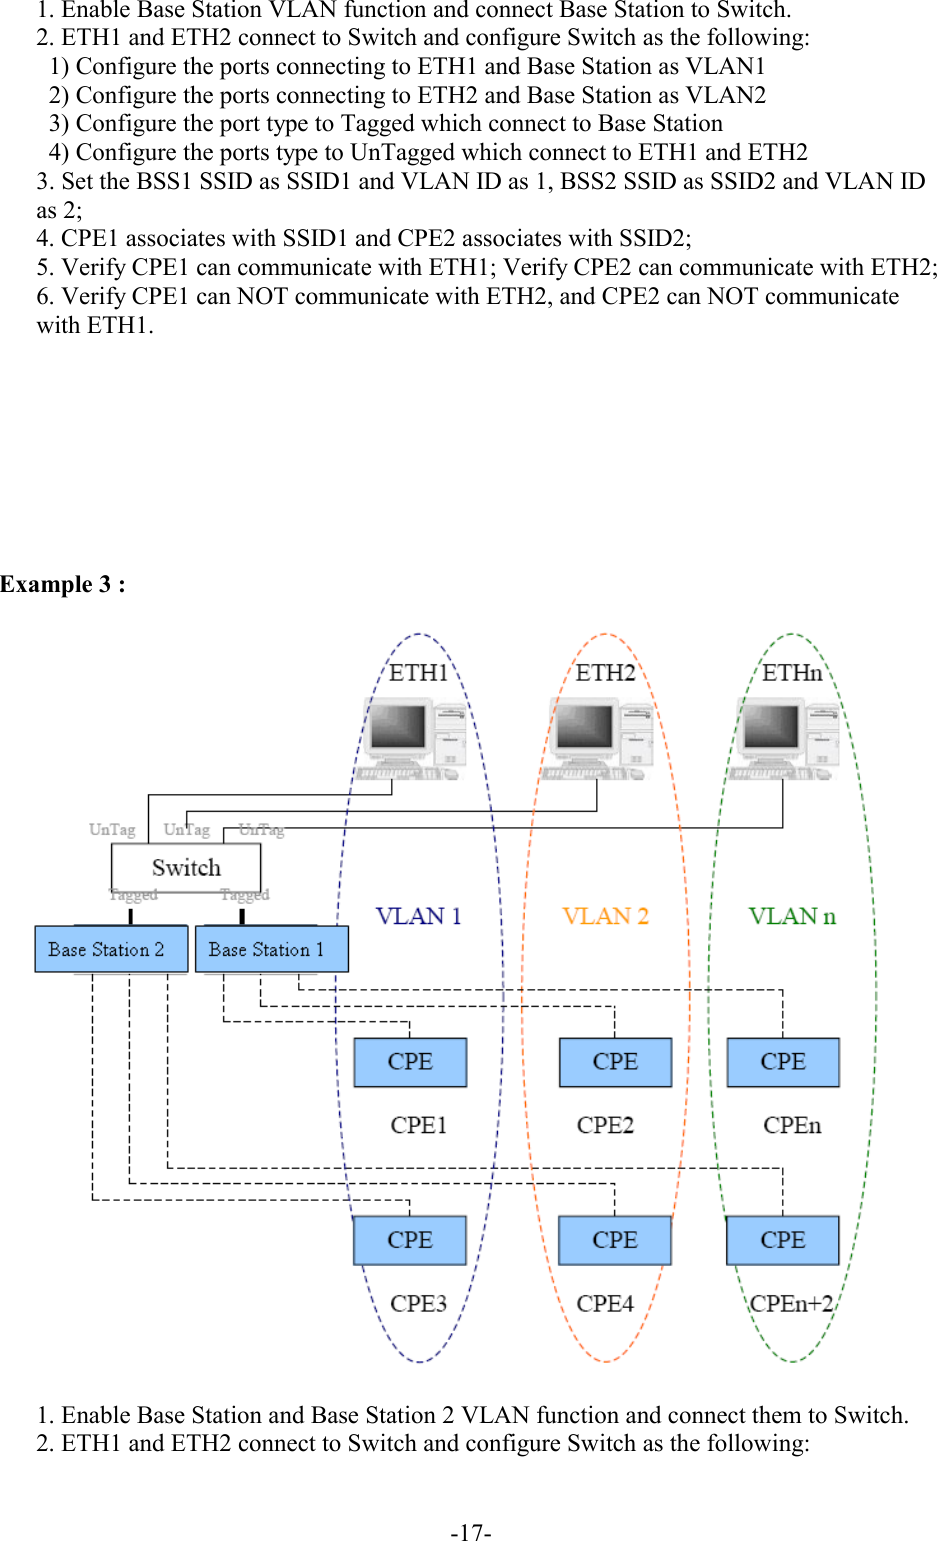  -17-  1. Enable Base Station VLAN function and connect Base Station to Switch.     2. ETH1 and ETH2 connect to Switch and configure Switch as the following:    1) Configure the ports connecting to ETH1 and Base Station as VLAN1    2) Configure the ports connecting to ETH2 and Base Station as VLAN2    3) Configure the port type to Tagged which connect to Base Station    4) Configure the ports type to UnTagged which connect to ETH1 and ETH2     3. Set the BSS1 SSID as SSID1 and VLAN ID as 1, BSS2 SSID as SSID2 and VLAN ID as 2;     4. CPE1 associates with SSID1 and CPE2 associates with SSID2;     5. Verify CPE1 can communicate with ETH1; Verify CPE2 can communicate with ETH2;     6. Verify CPE1 can NOT communicate with ETH2, and CPE2 can NOT communicate with ETH1.           Example 3 :      1. Enable Base Station and Base Station 2 VLAN function and connect them to Switch.     2. ETH1 and ETH2 connect to Switch and configure Switch as the following:   